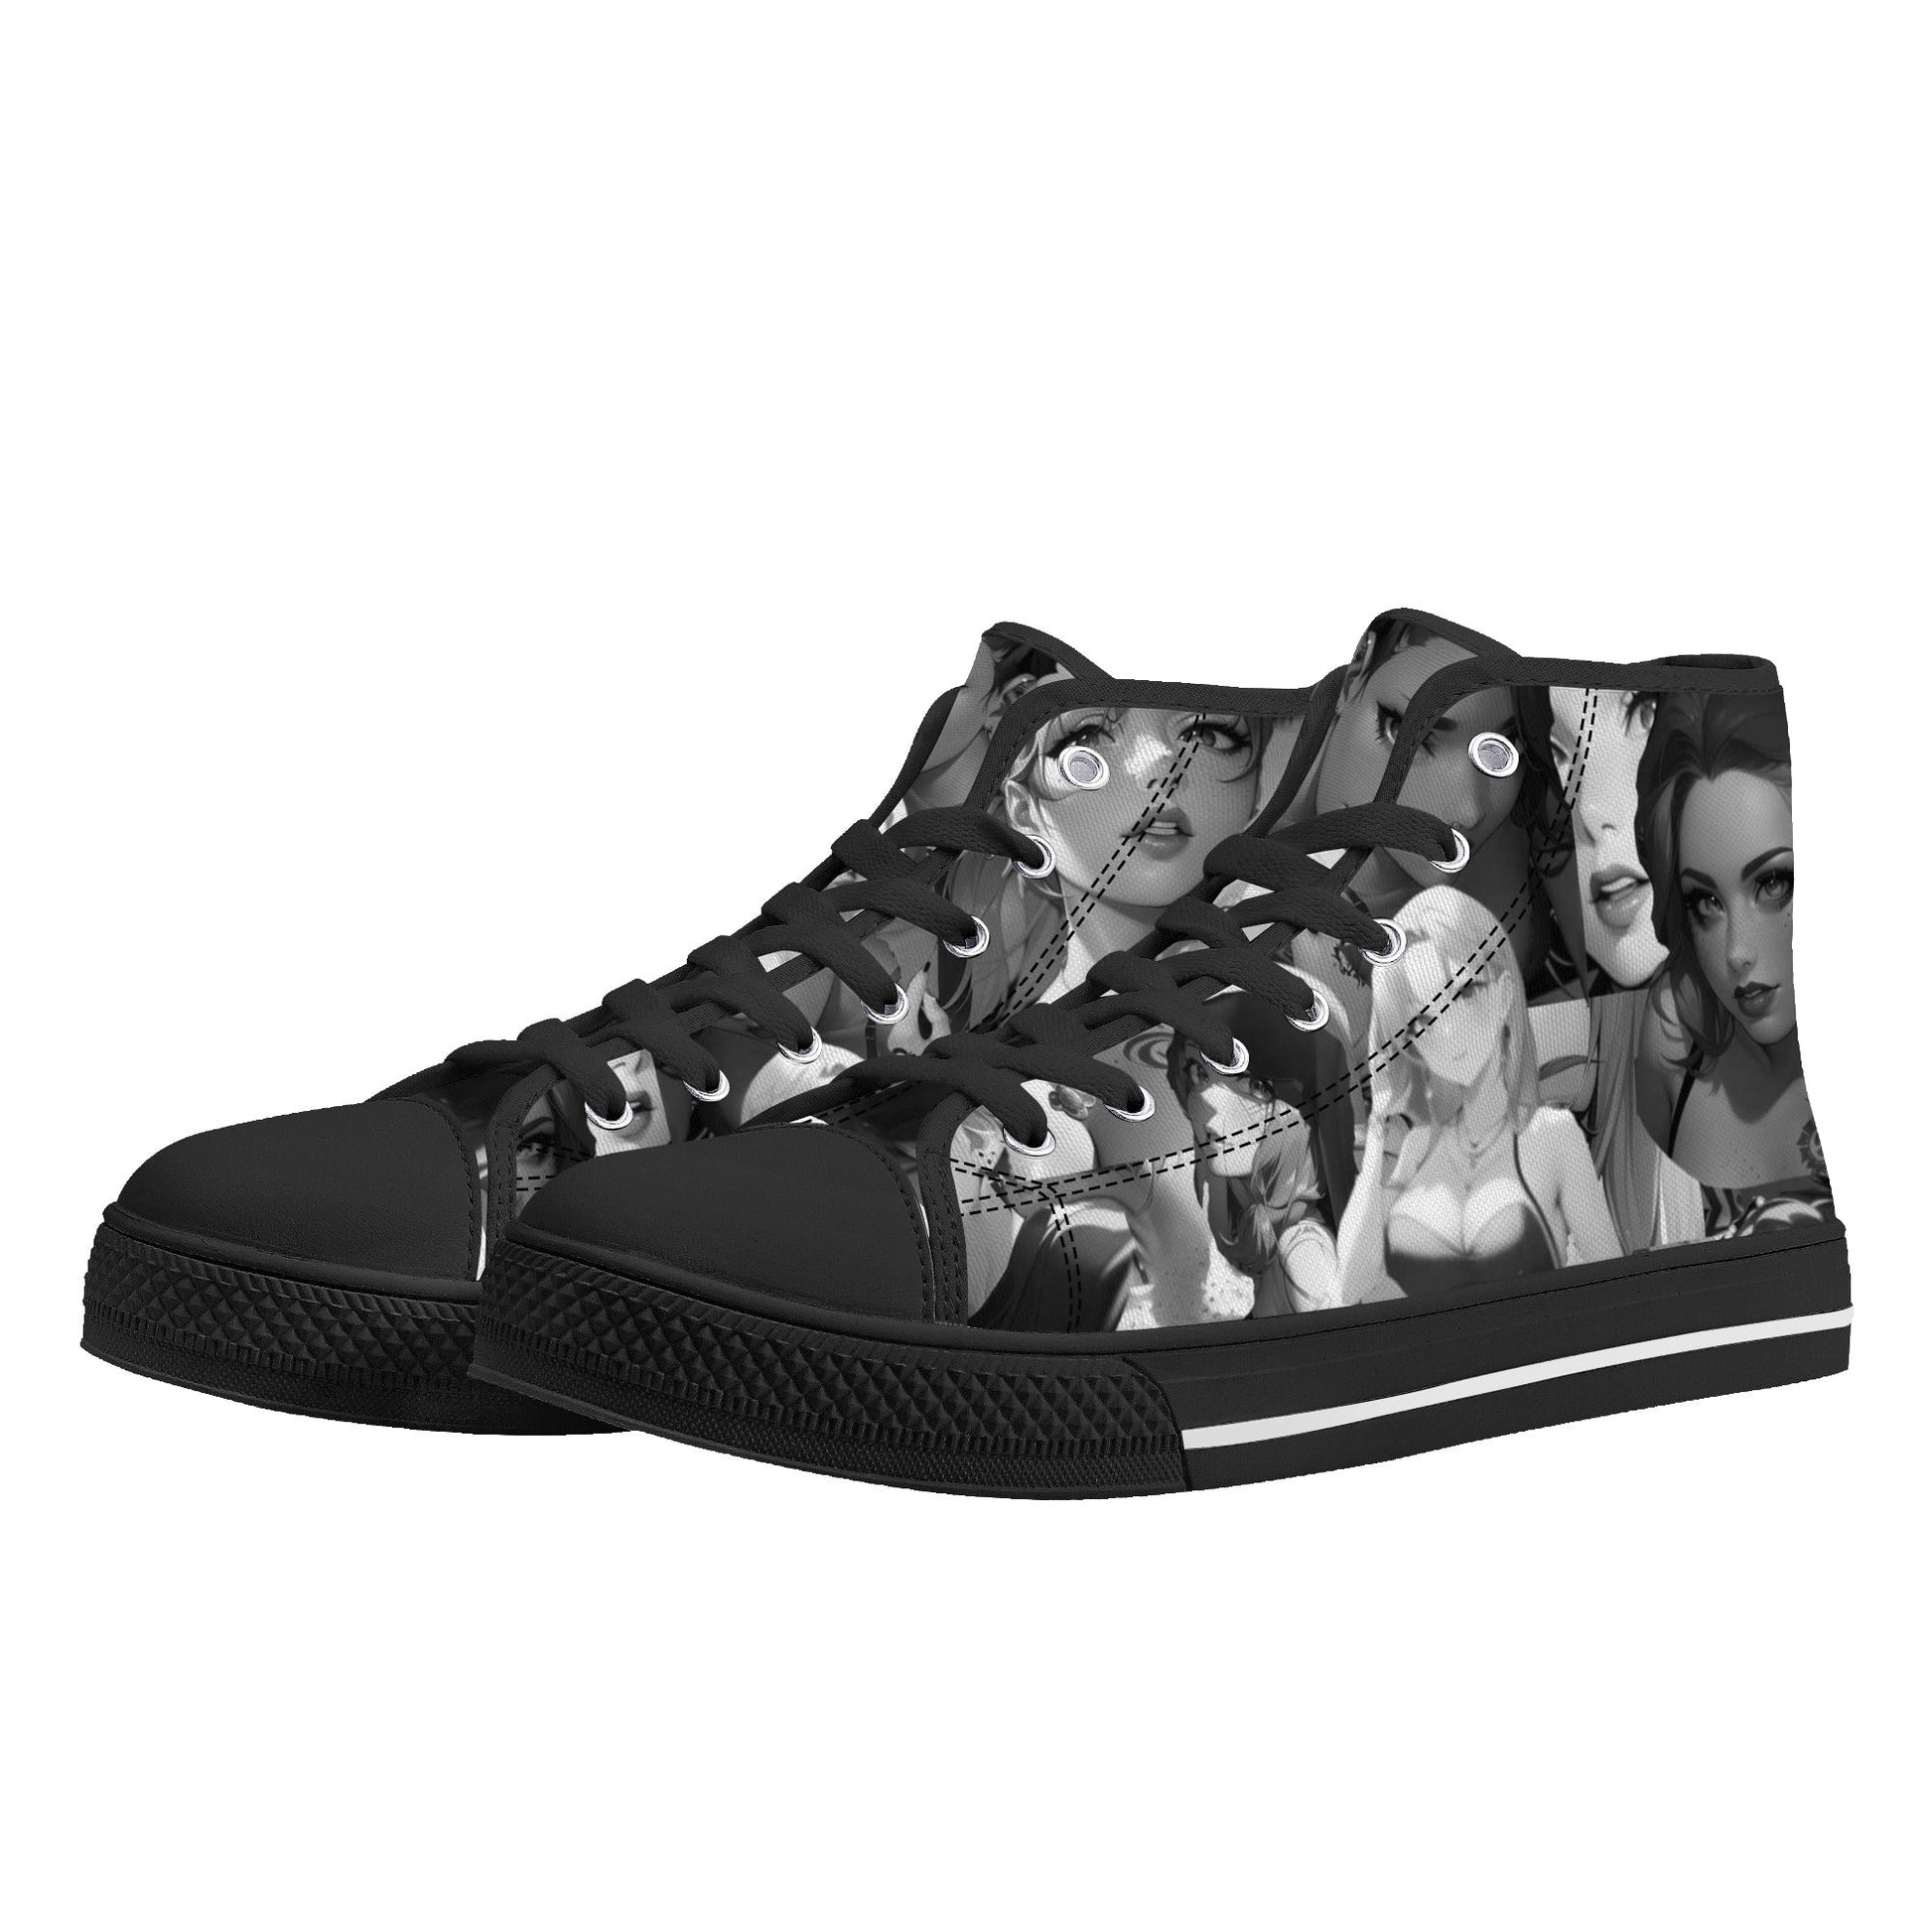 Stand out  with the  Waifu Mens High Top Canvas Shoes  available at Hey Nugget. Grab yours today!